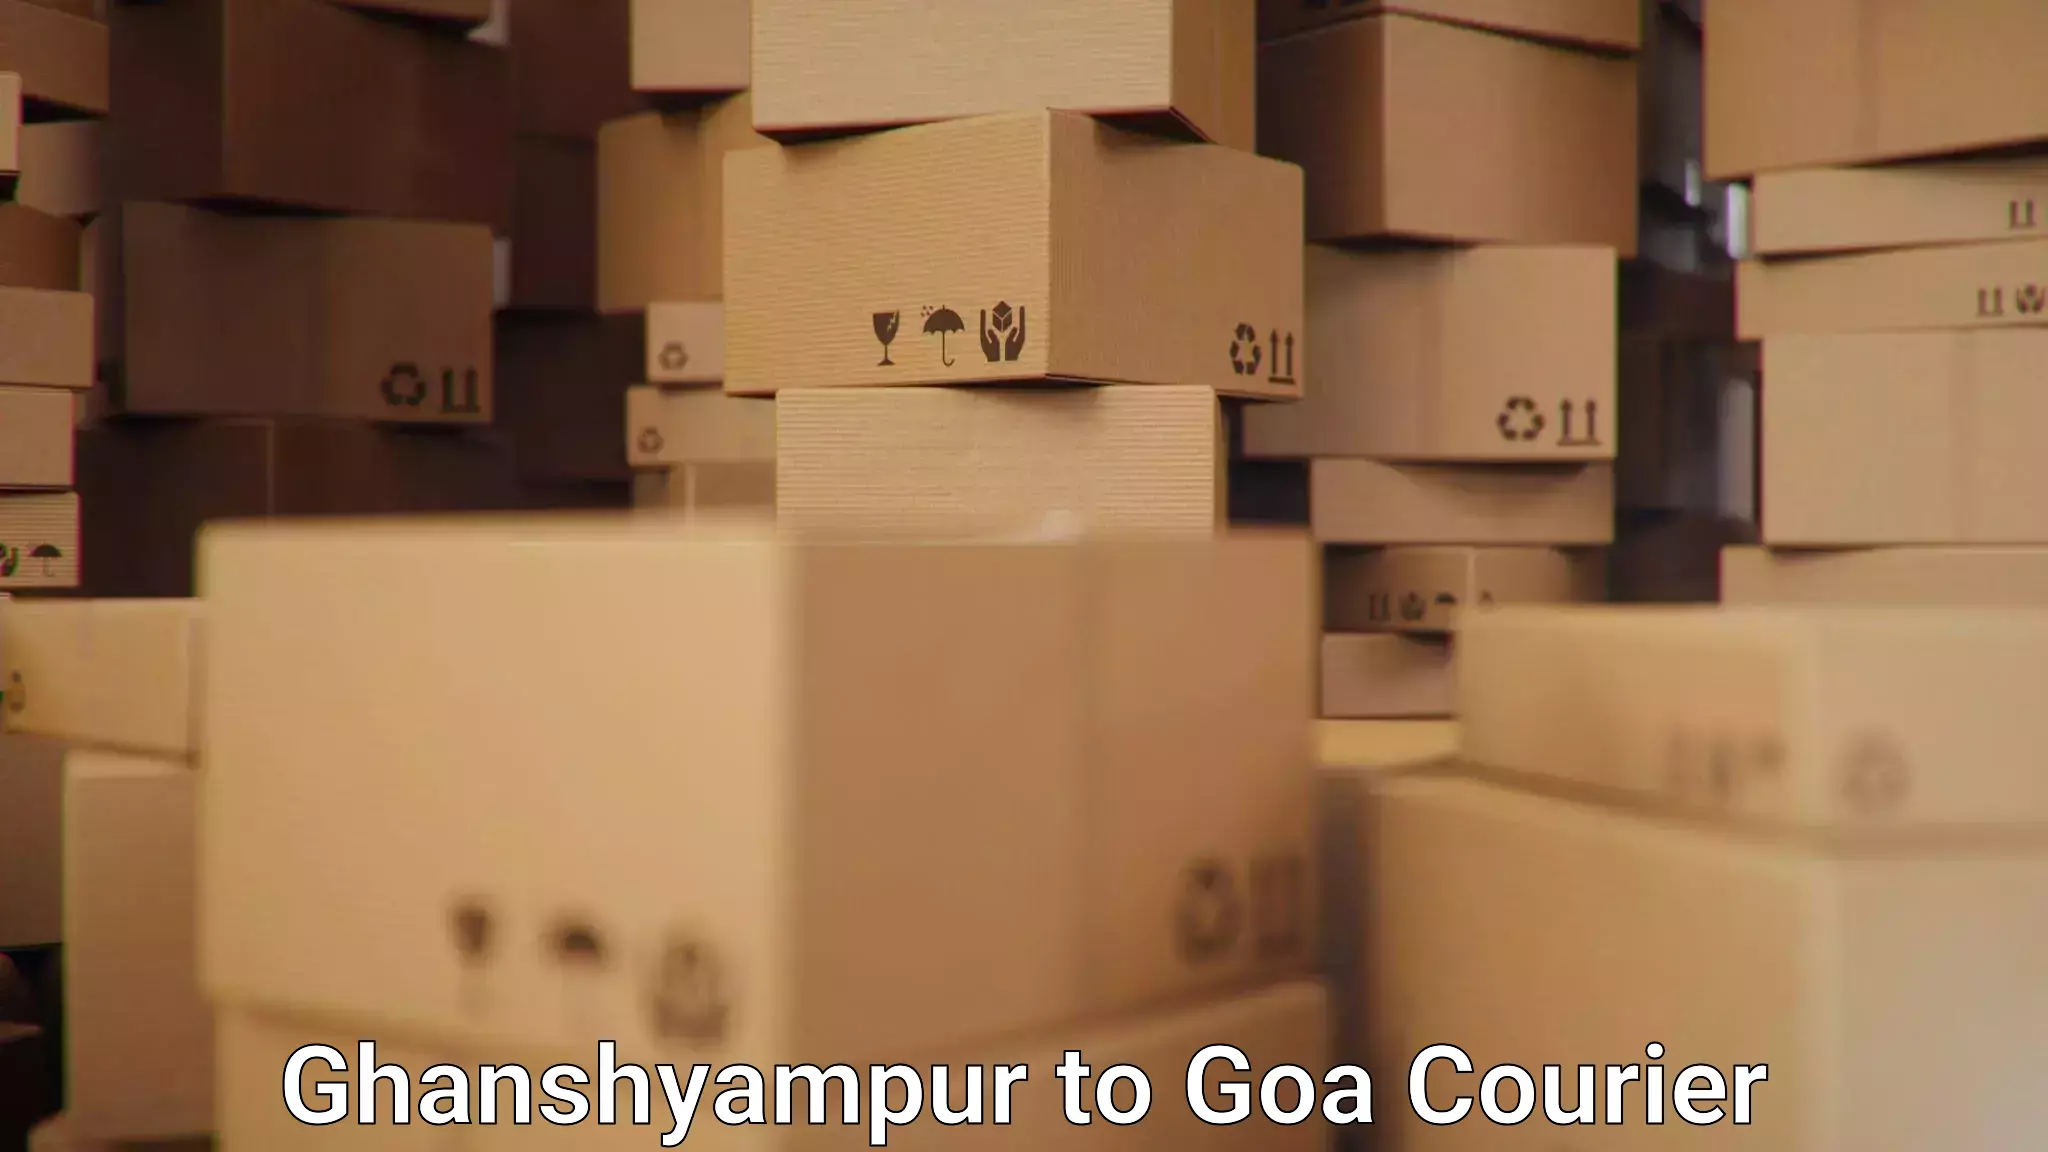 Cargo delivery service Ghanshyampur to Goa